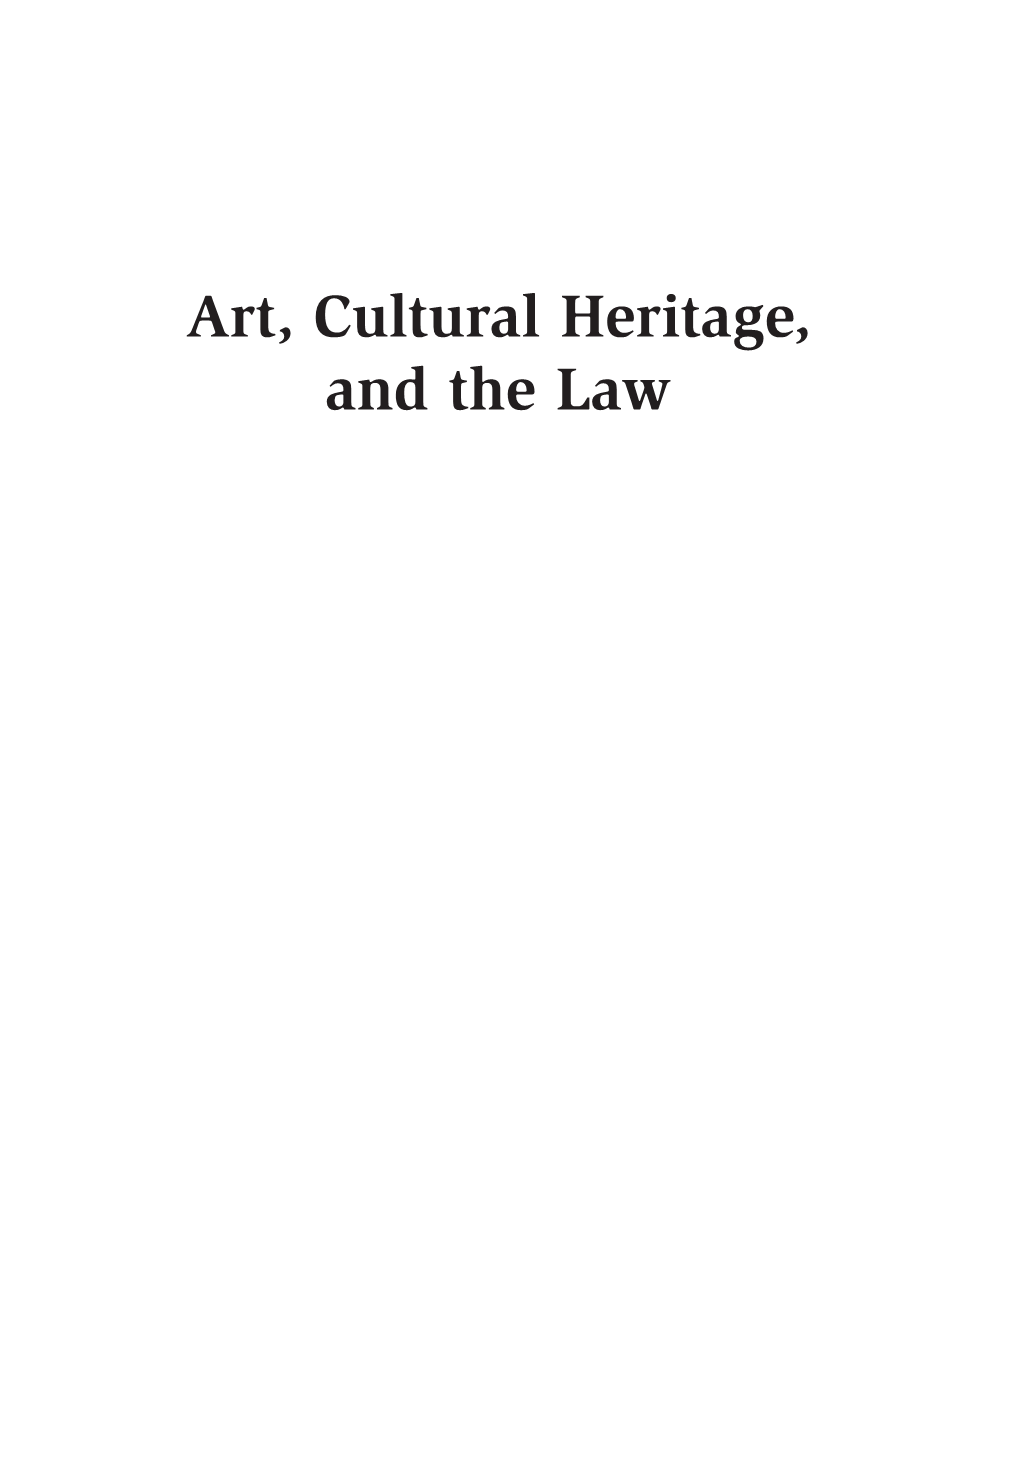 Art, Cultural Heritage, and the Law Gerstenblith 2E 00 Fmt 7/2/08 11:56 AM Page Ii